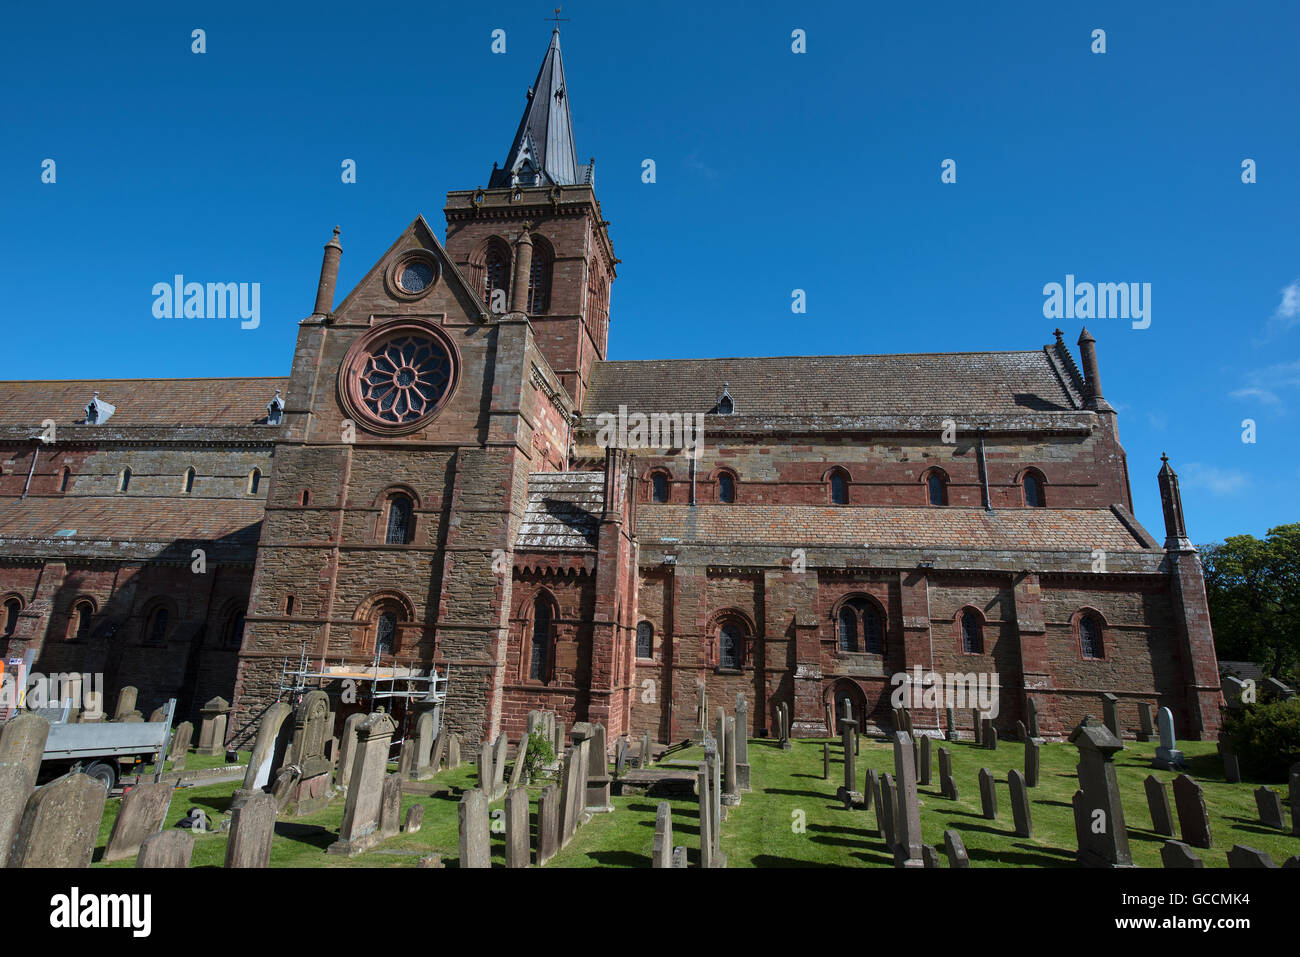 St Magnus Cathedral, a Kirkwall sulle Isole Orkney. SCO 10,585. Foto Stock